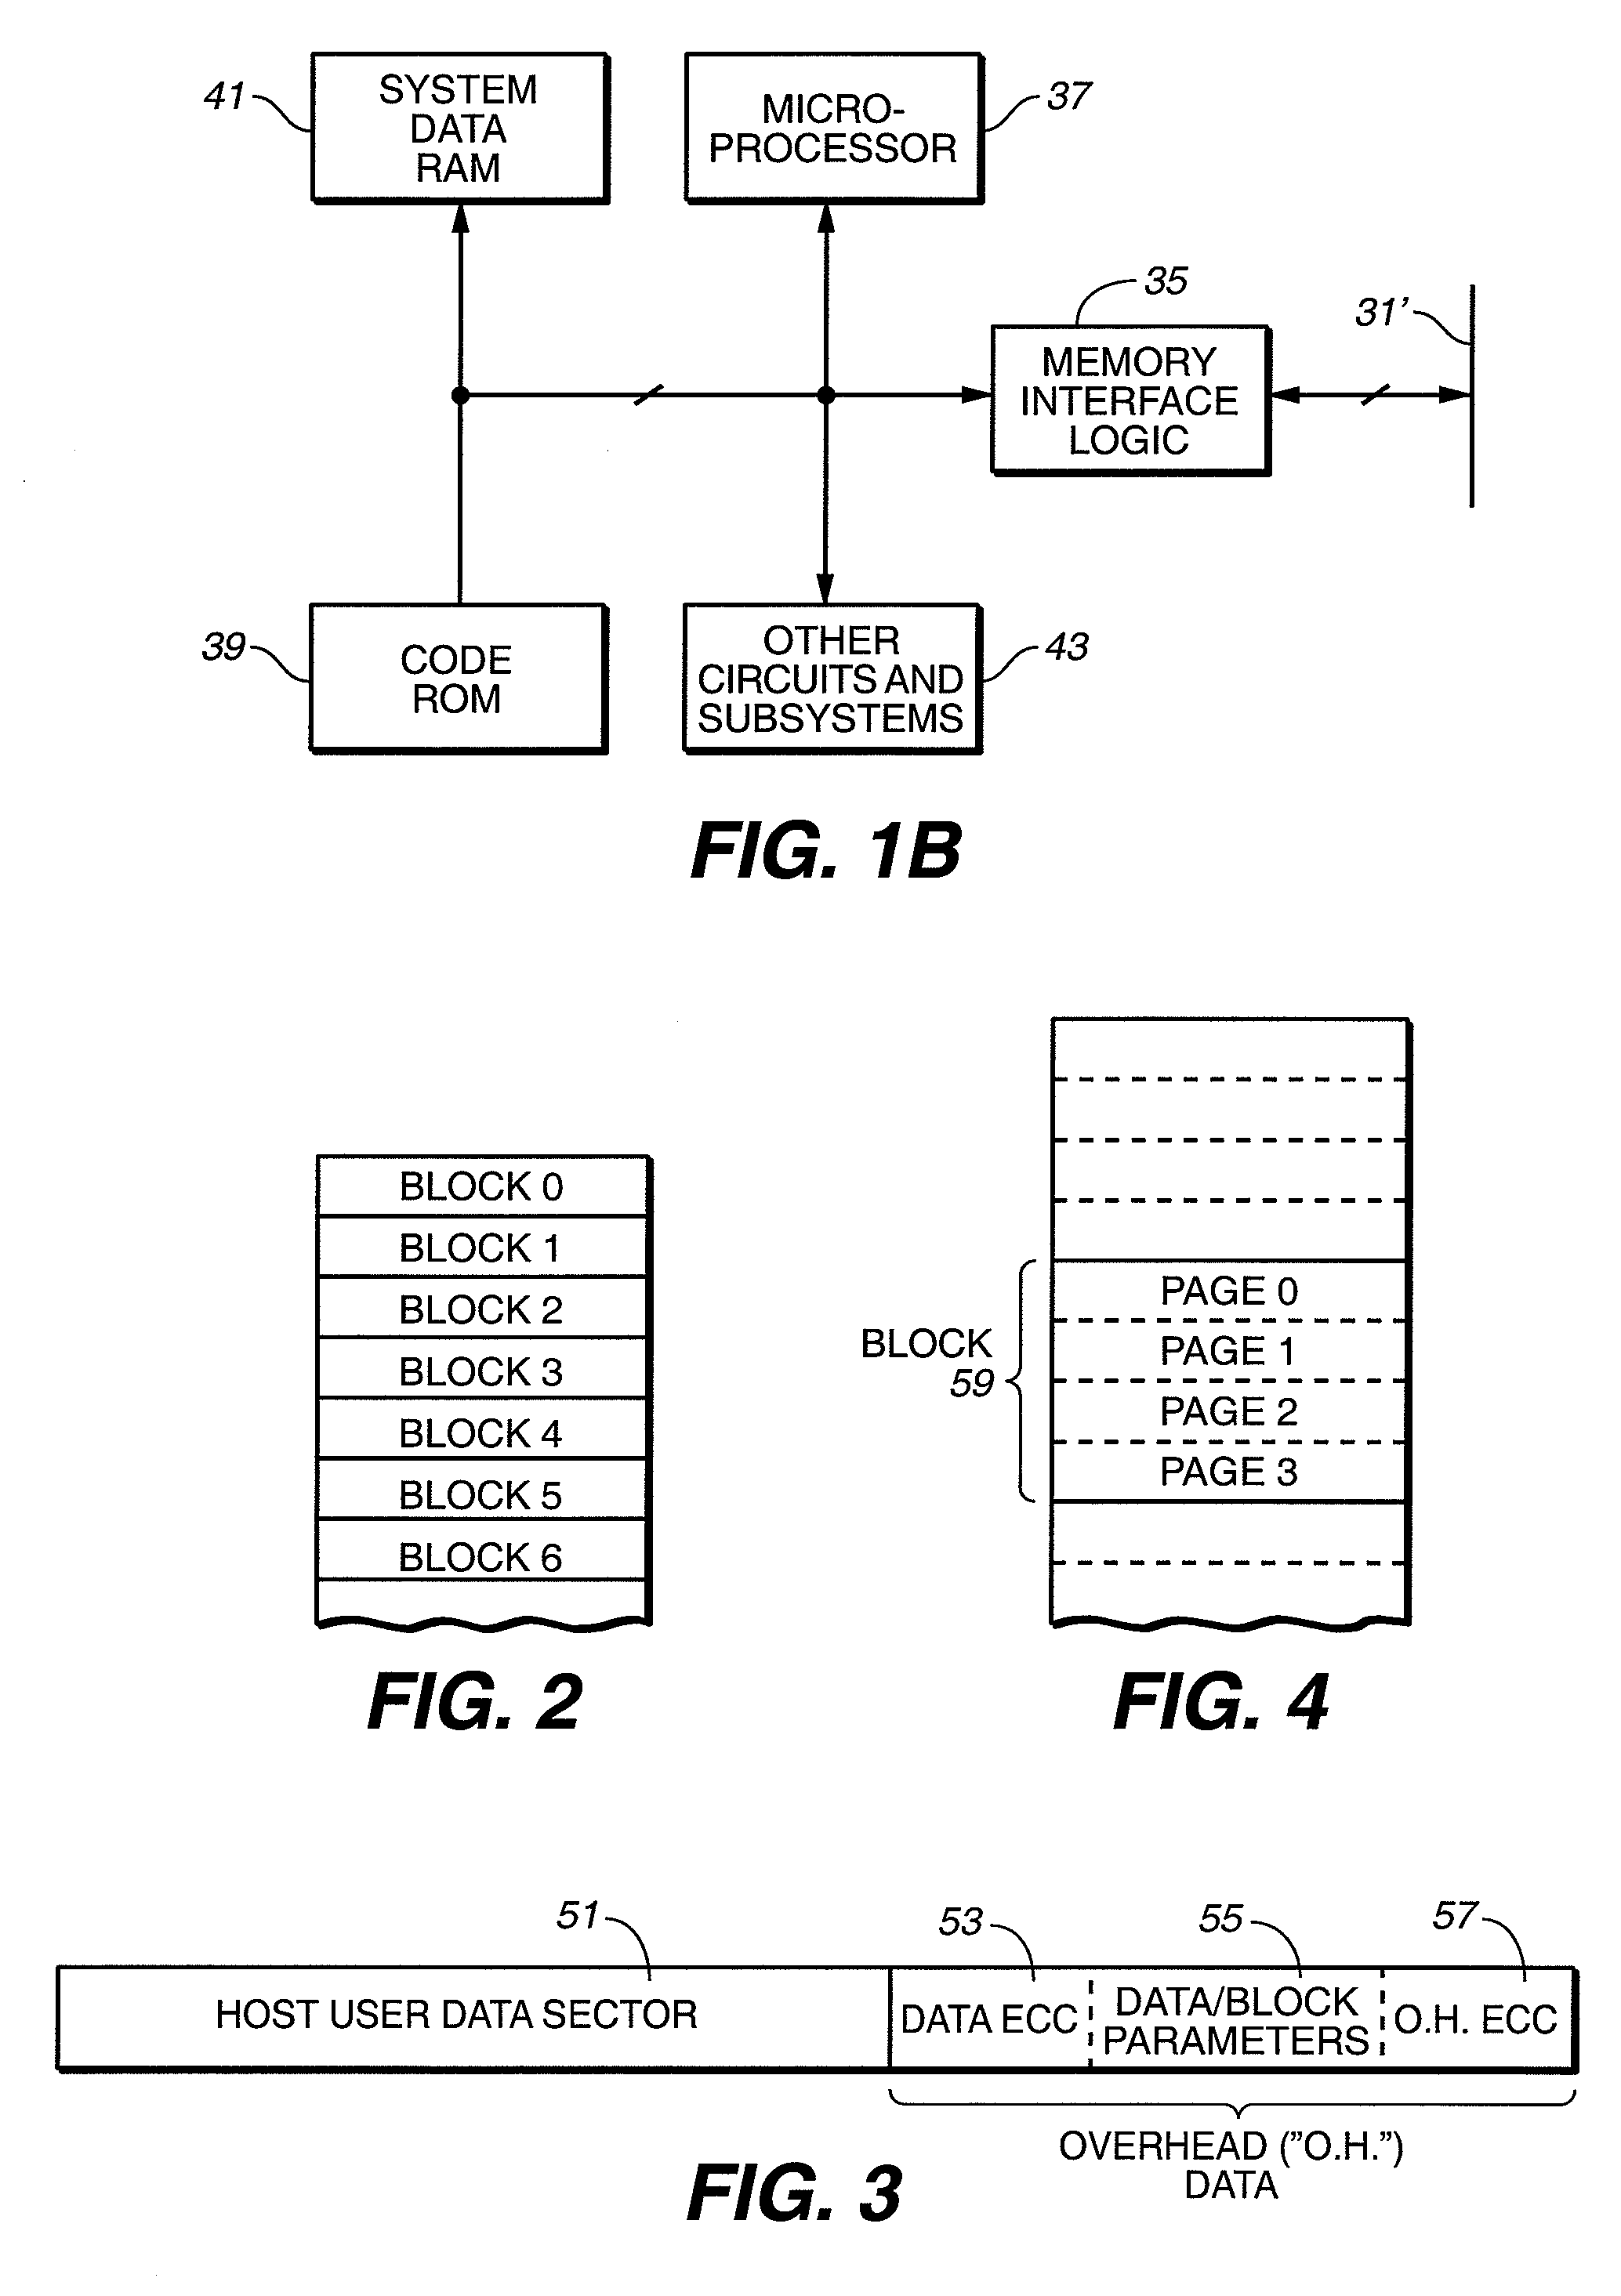 Scheduling of Housekeeping Operations in Flash Memory Systems